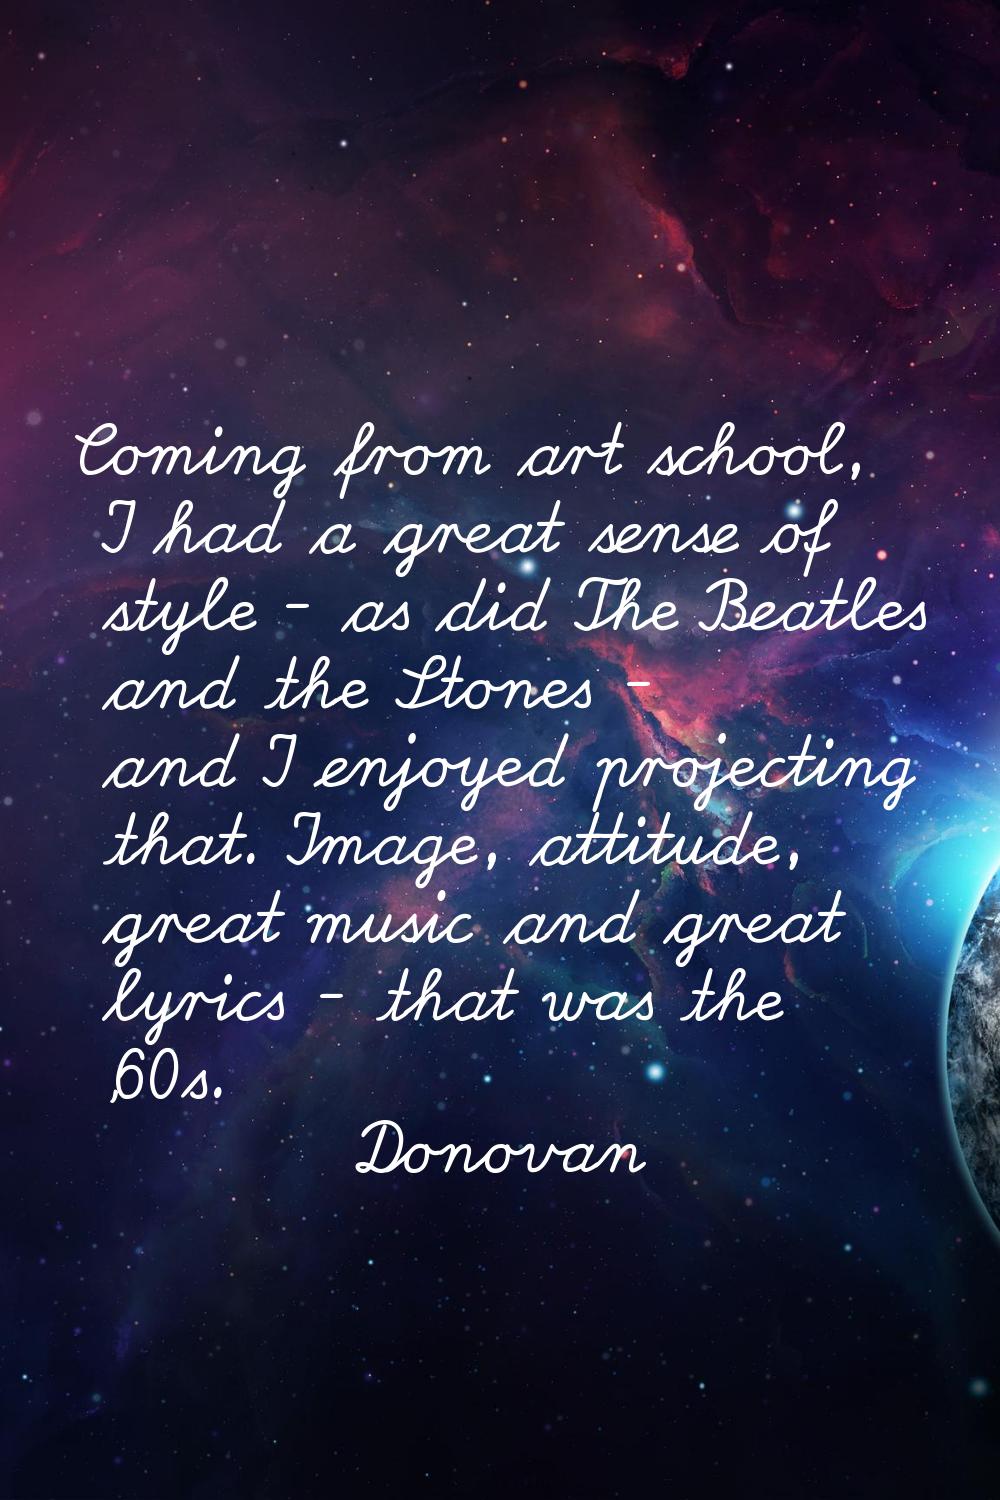 Coming from art school, I had a great sense of style - as did The Beatles and the Stones - and I en